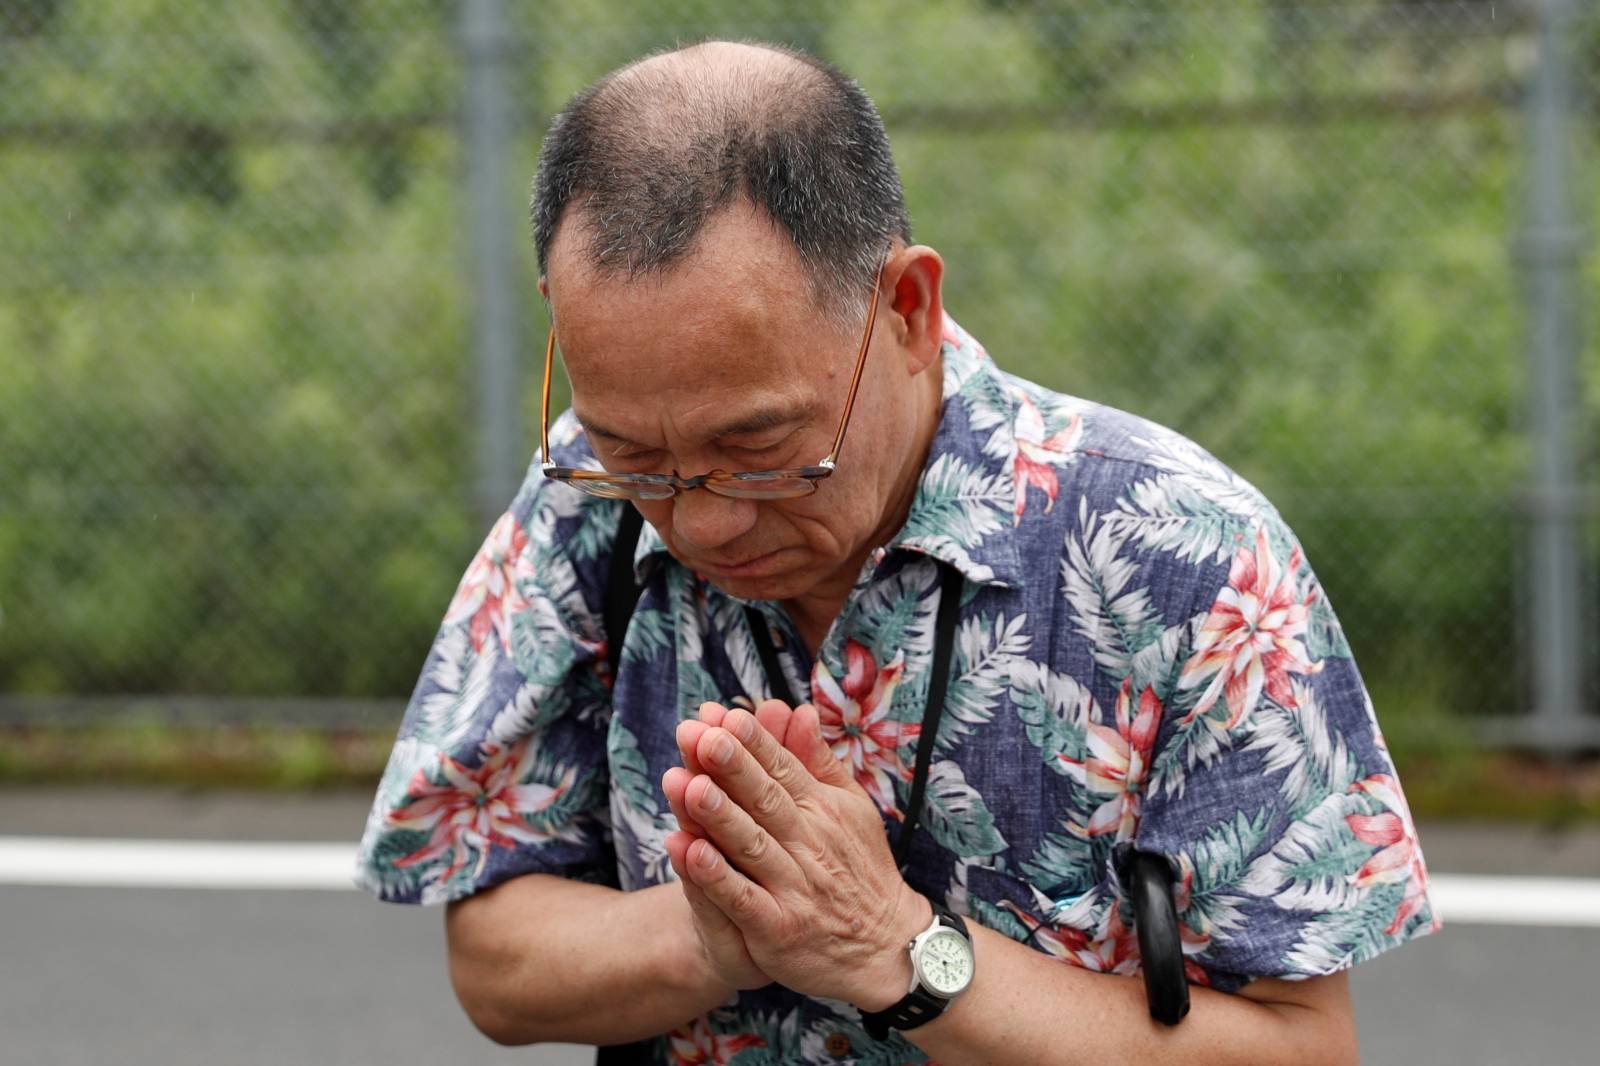 A man prays for the victims of the arson attack near the torched Kyoto Animation building n Kyoto